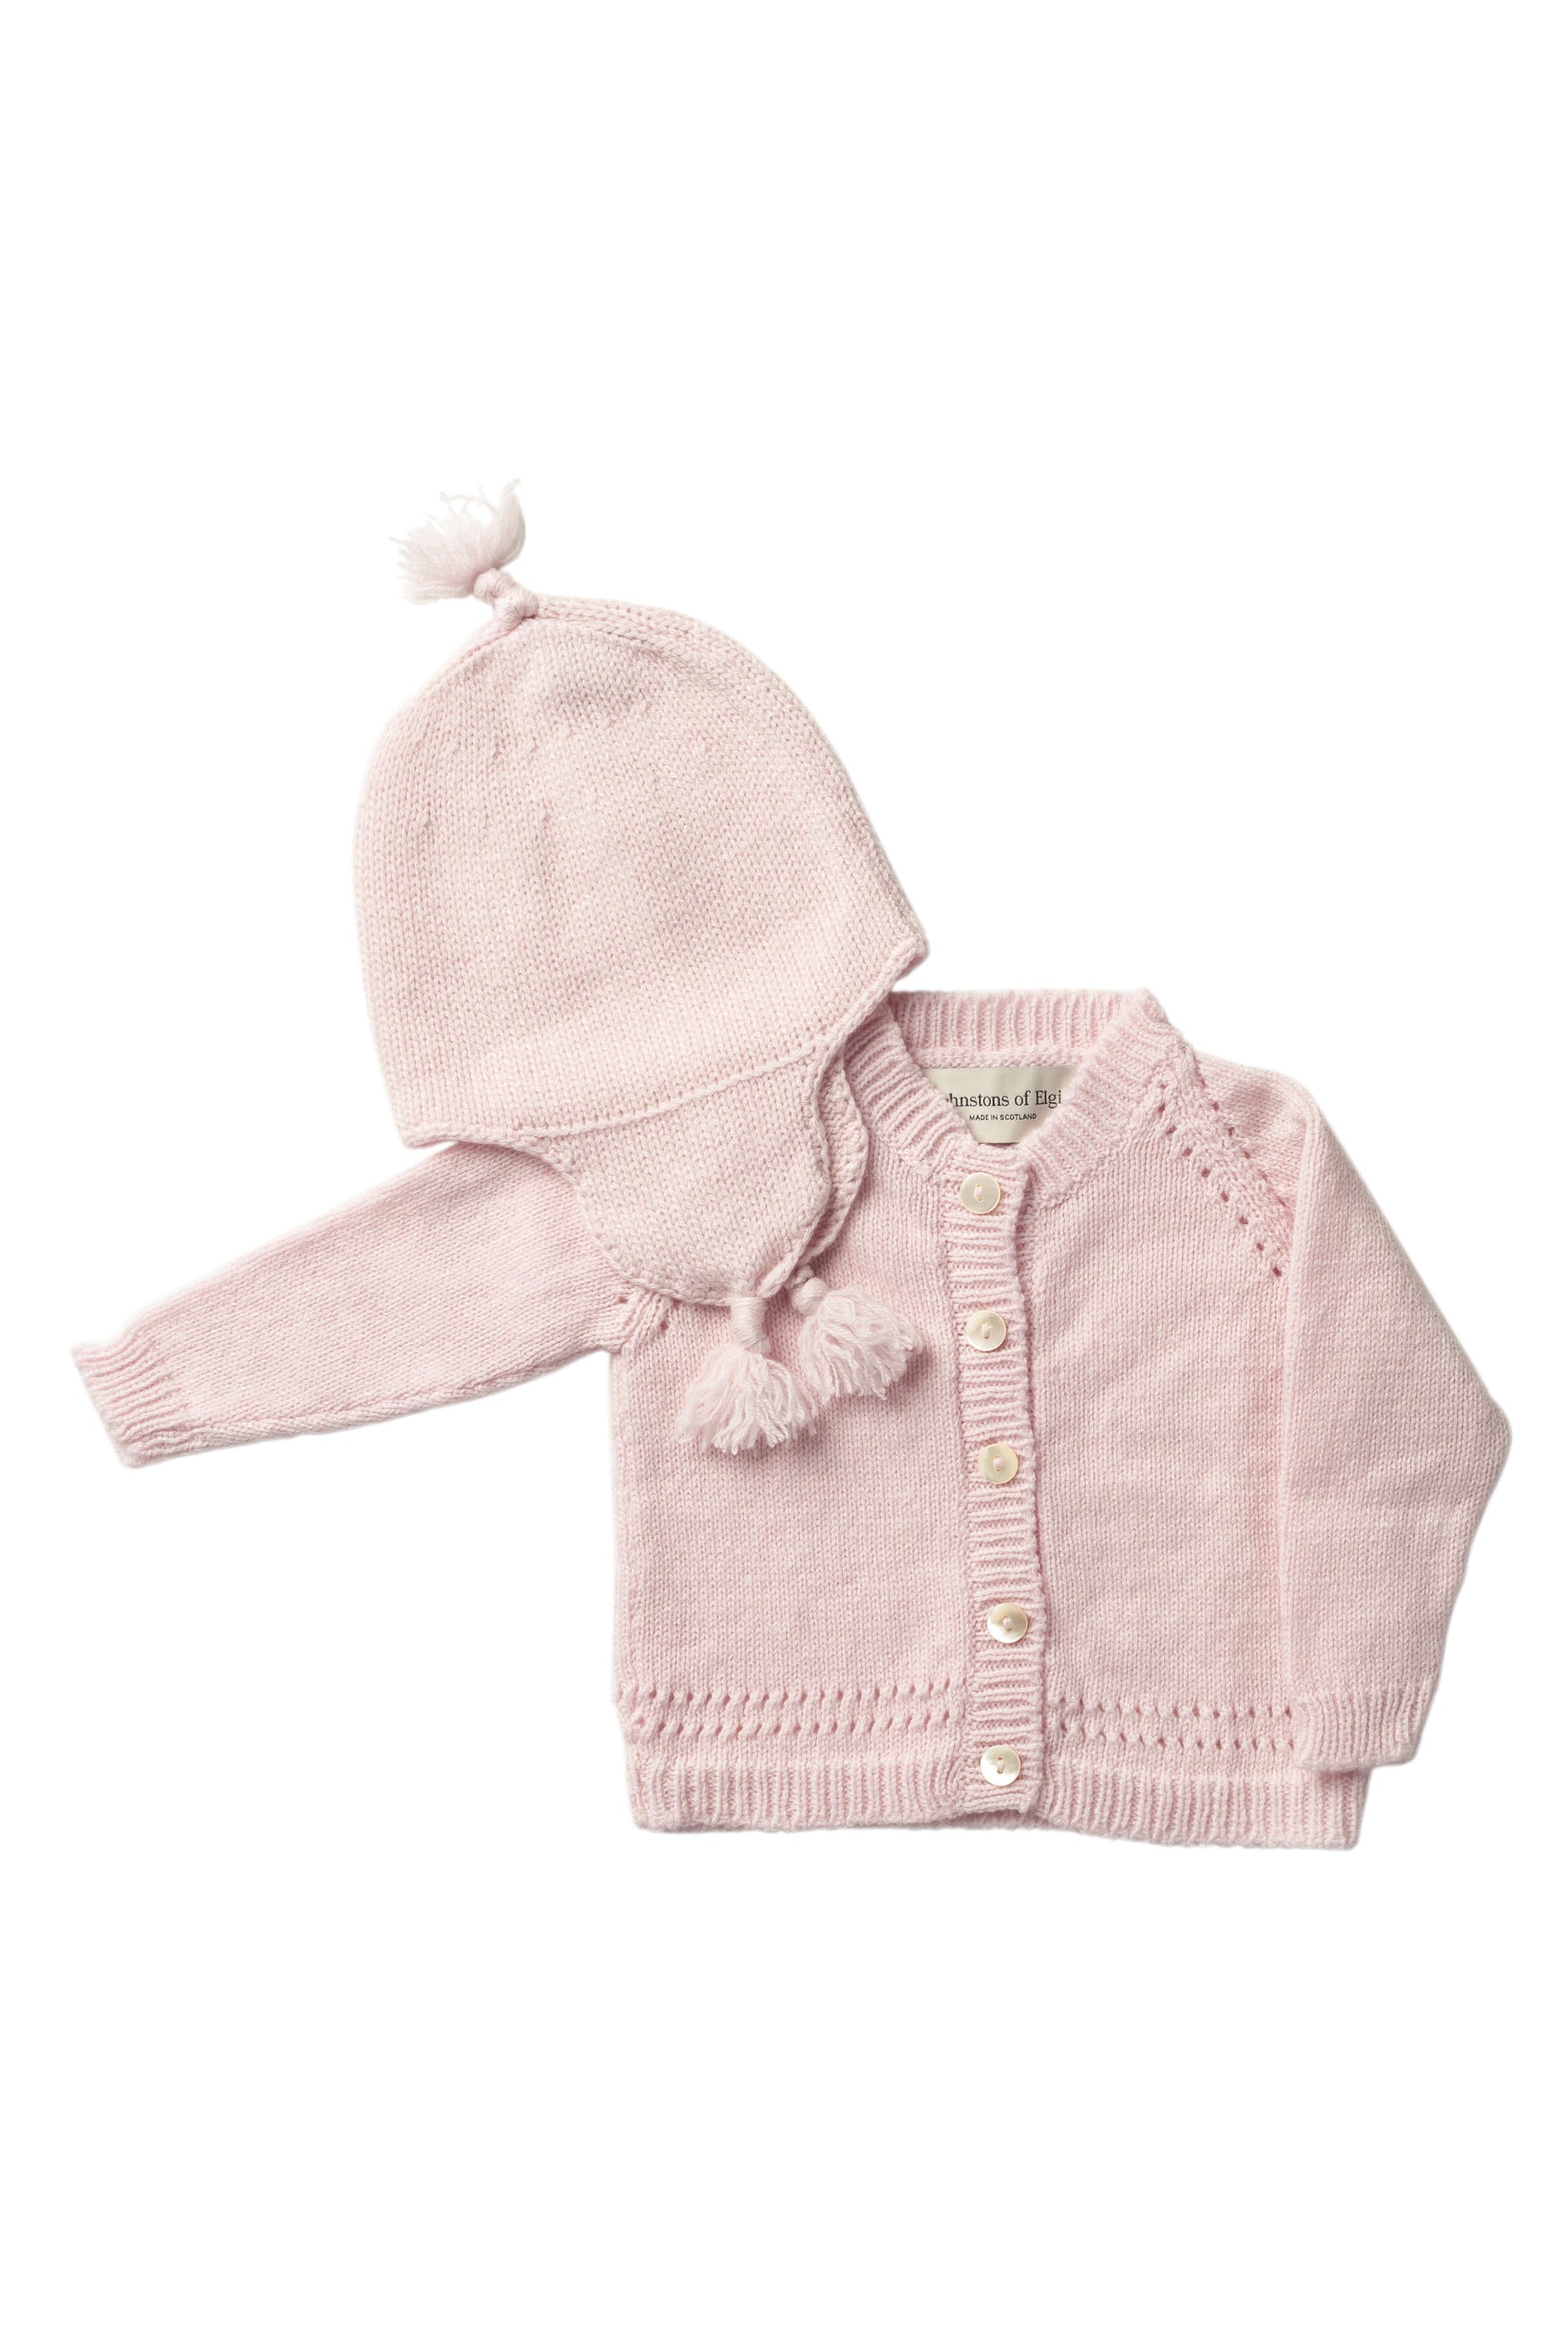 Johnstons of Elgin Baby Handknits Blush Hand Knit Cashmere Baby Cardigan & Cashmere Beanie Giftset AW21GIFTSET19B